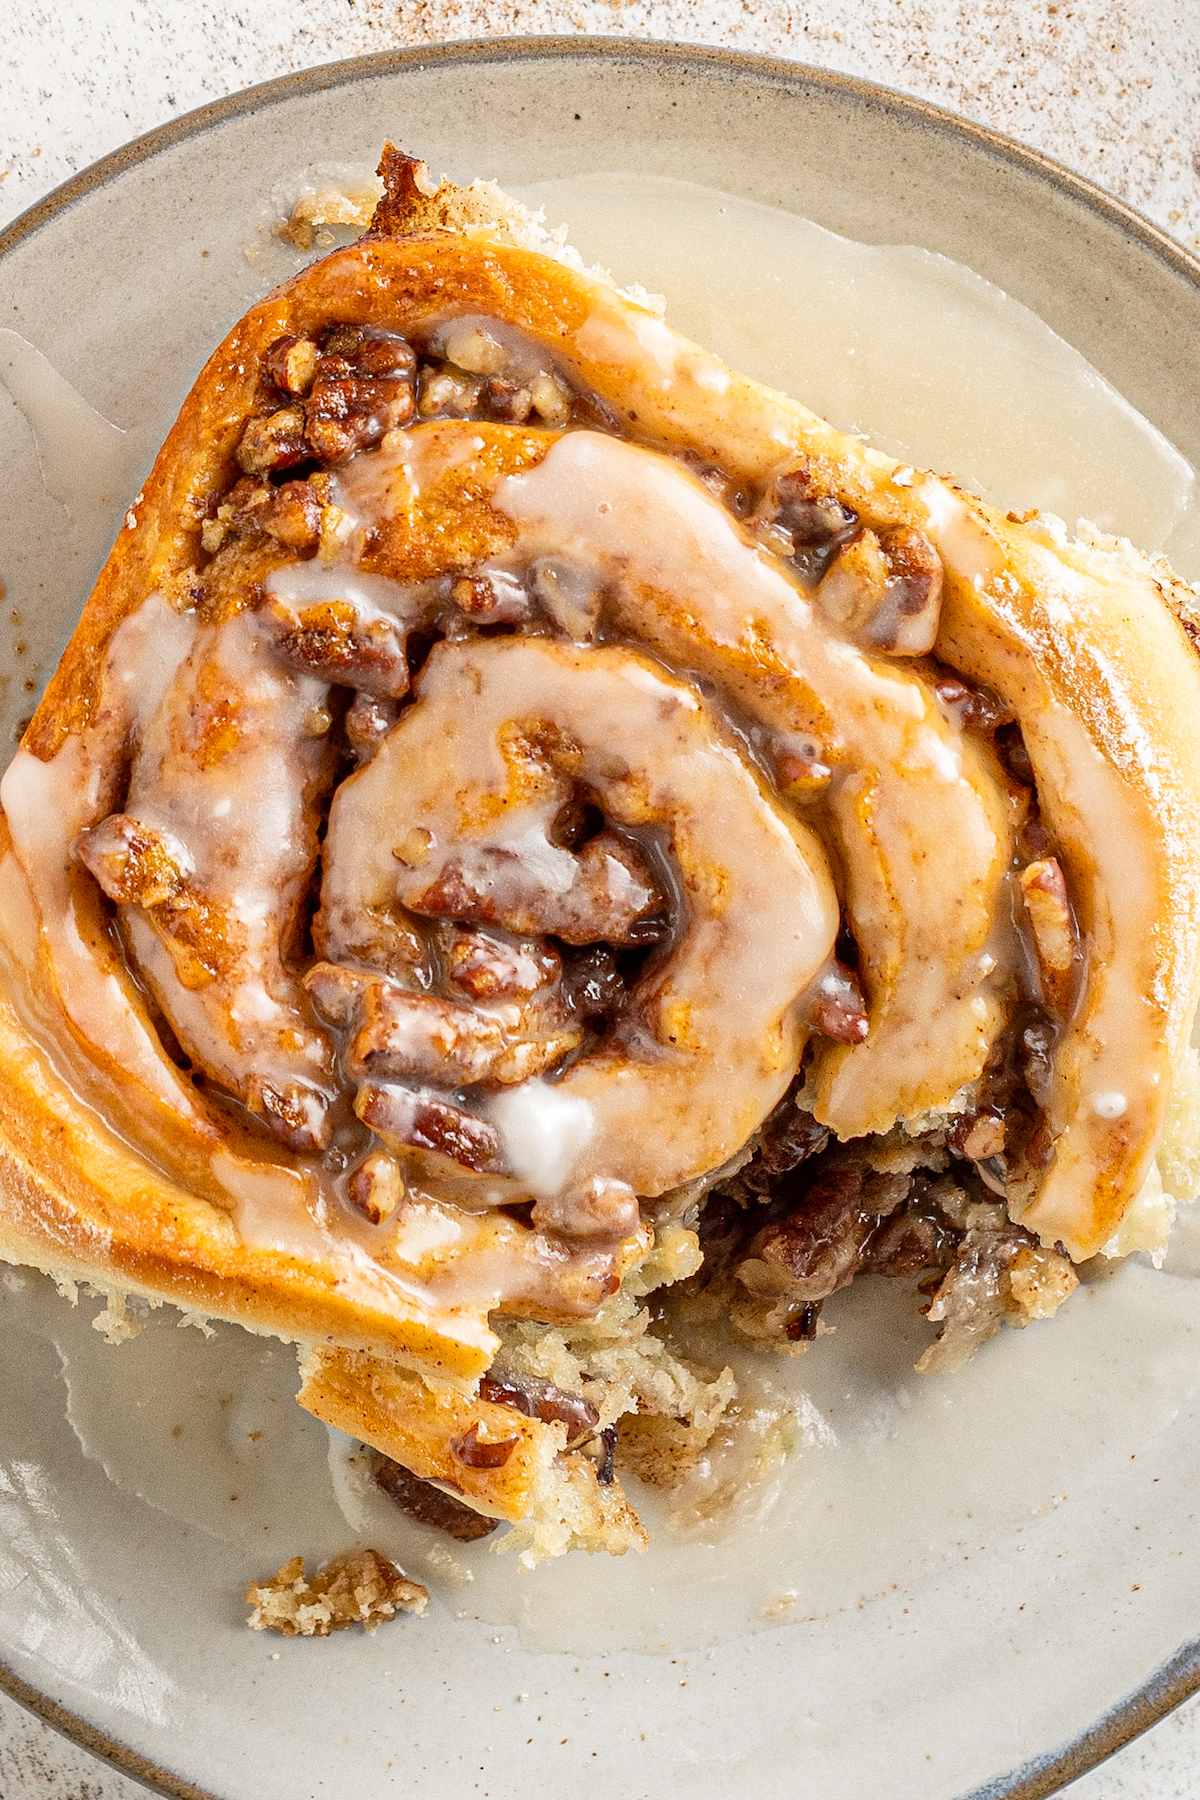 Overhead shot of an iced pecan cinnamon roll with a bite taken from it.